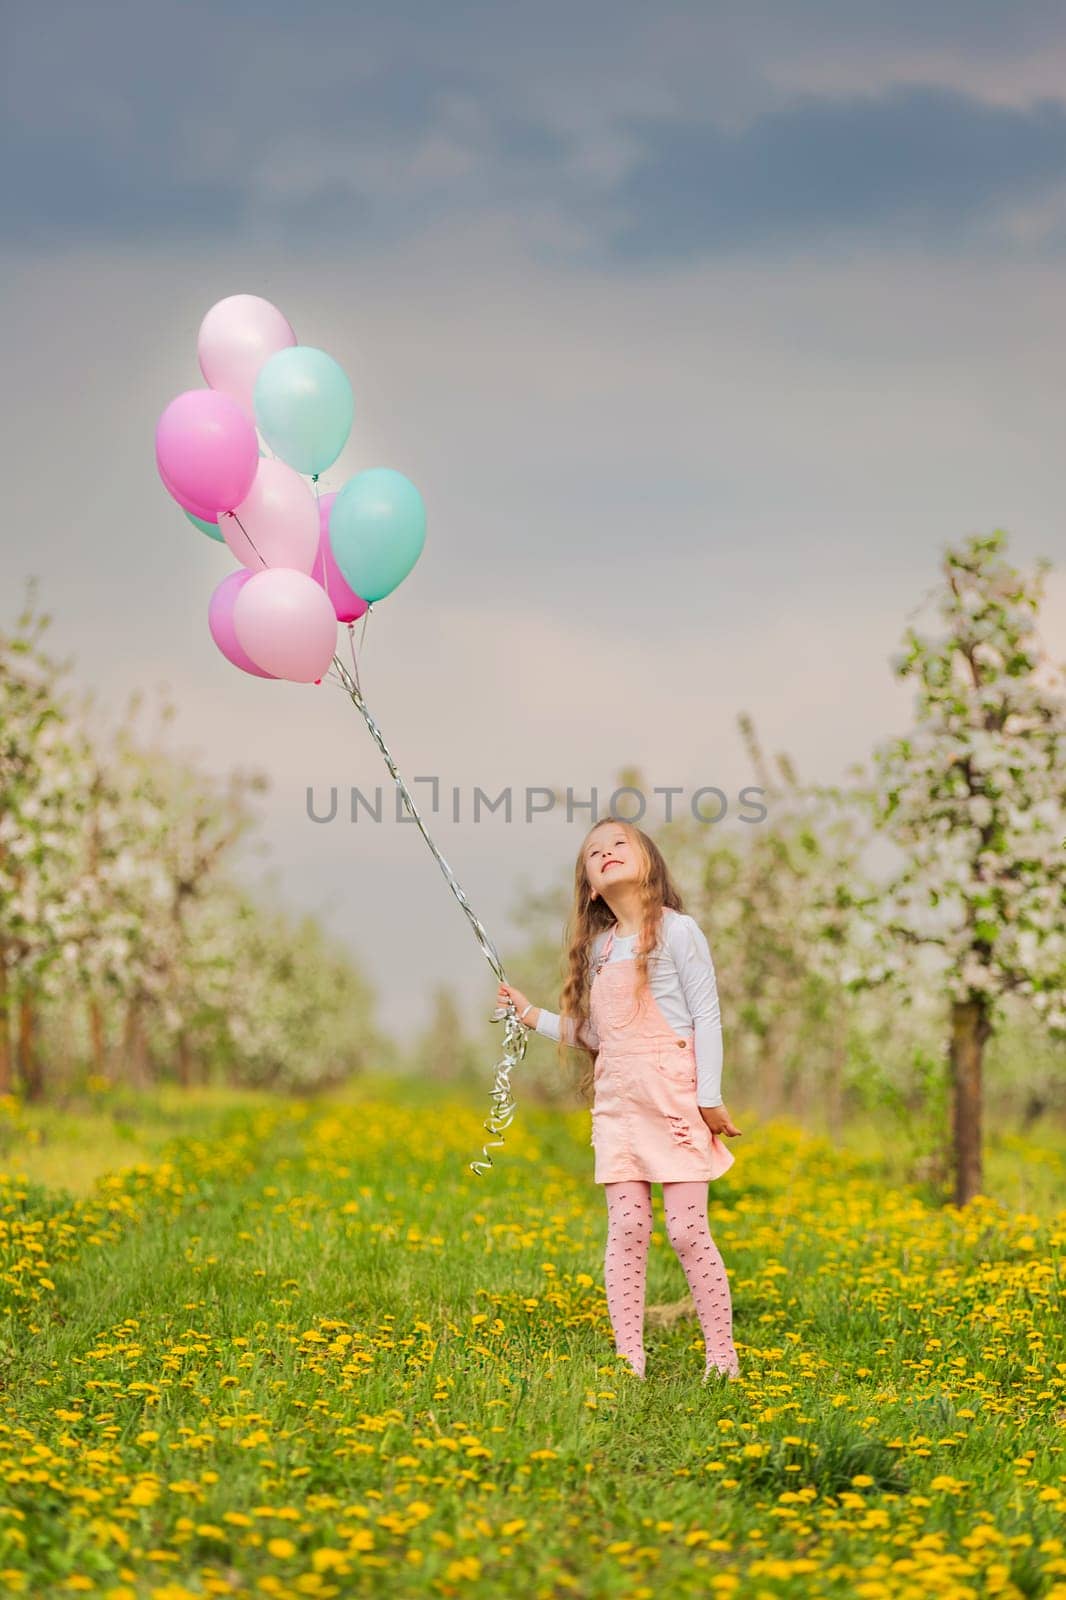 girl with balloons in a young apple orchard